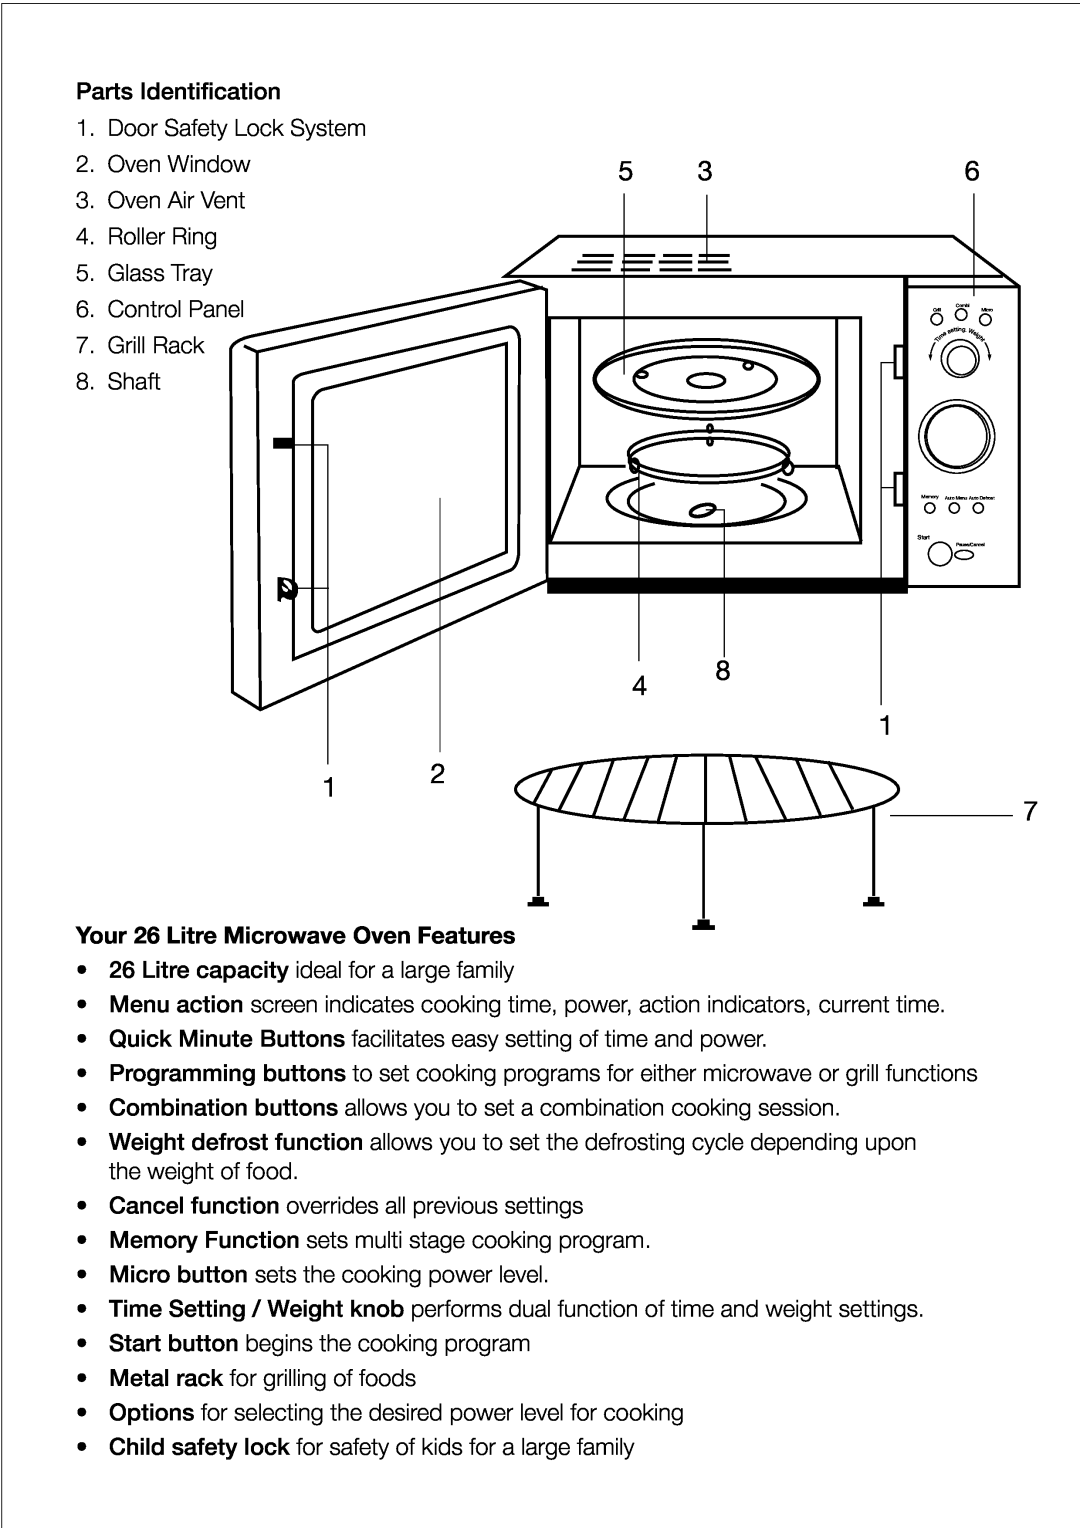 Black & Decker MY26PG manual Your 26 Litre Microwave Oven Features 